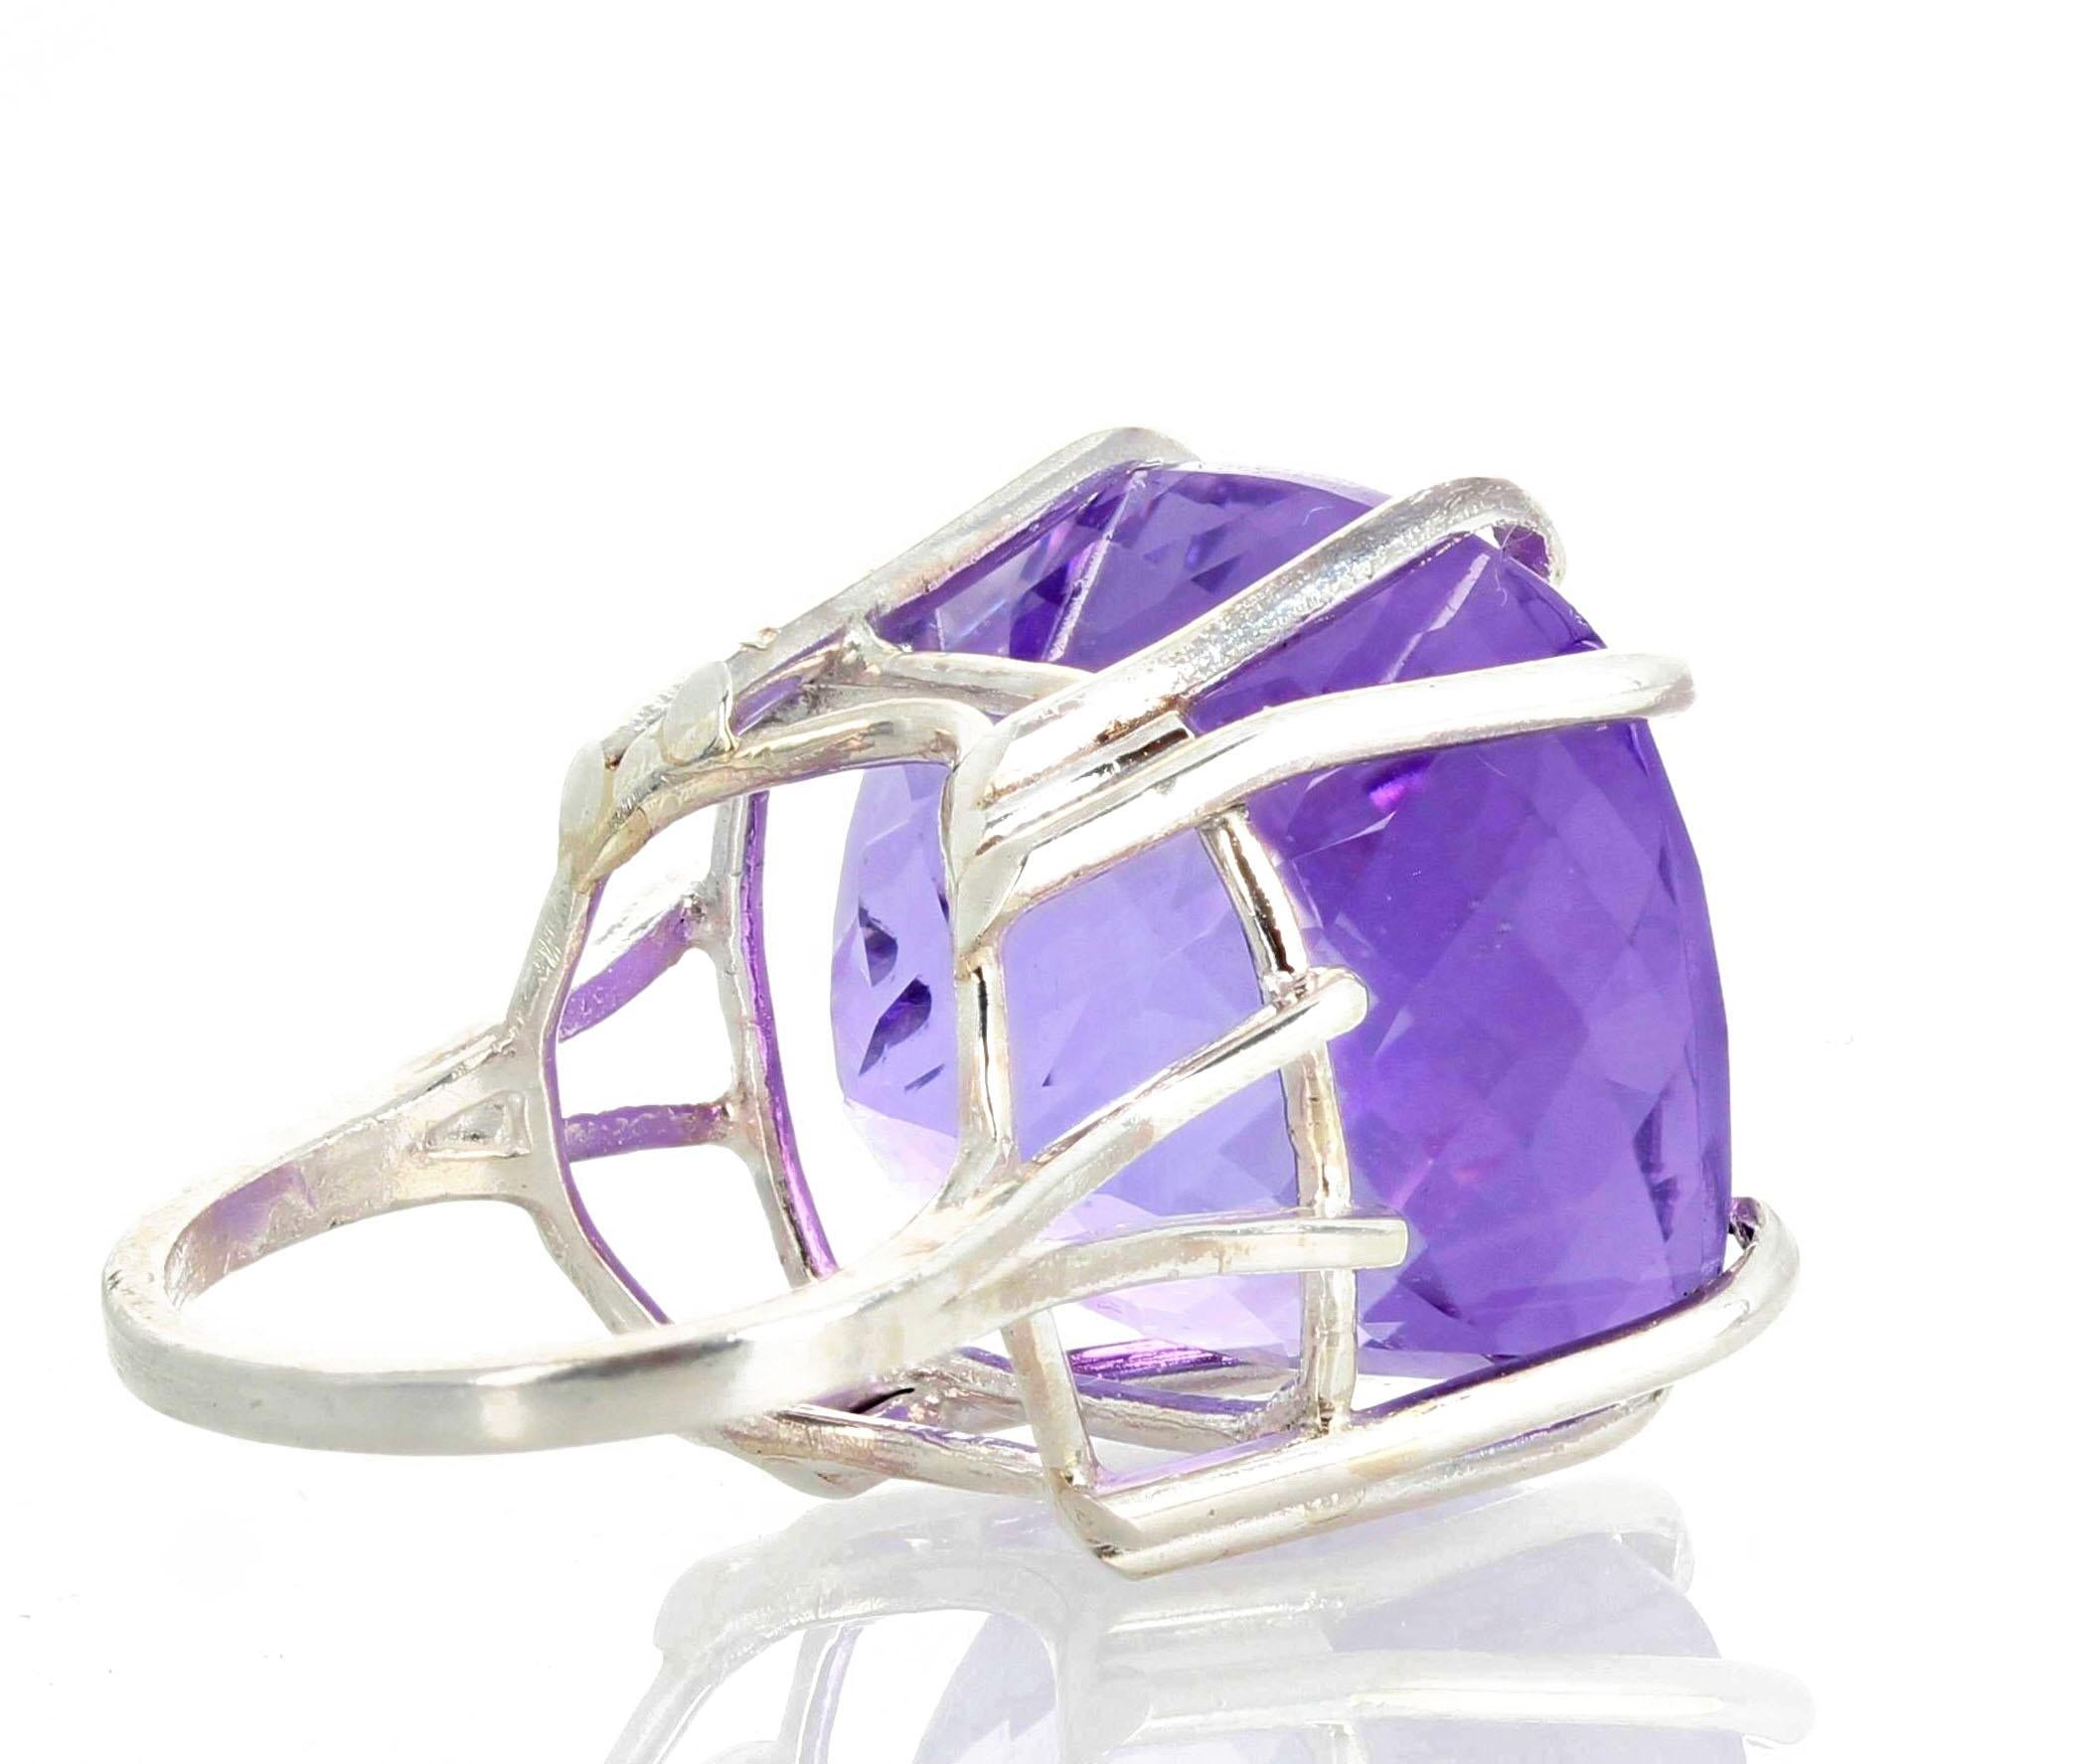 Women's or Men's AJD Magnificent Whoppingly Enormous 44 Carat Exquisite Amethyst Silver Ring